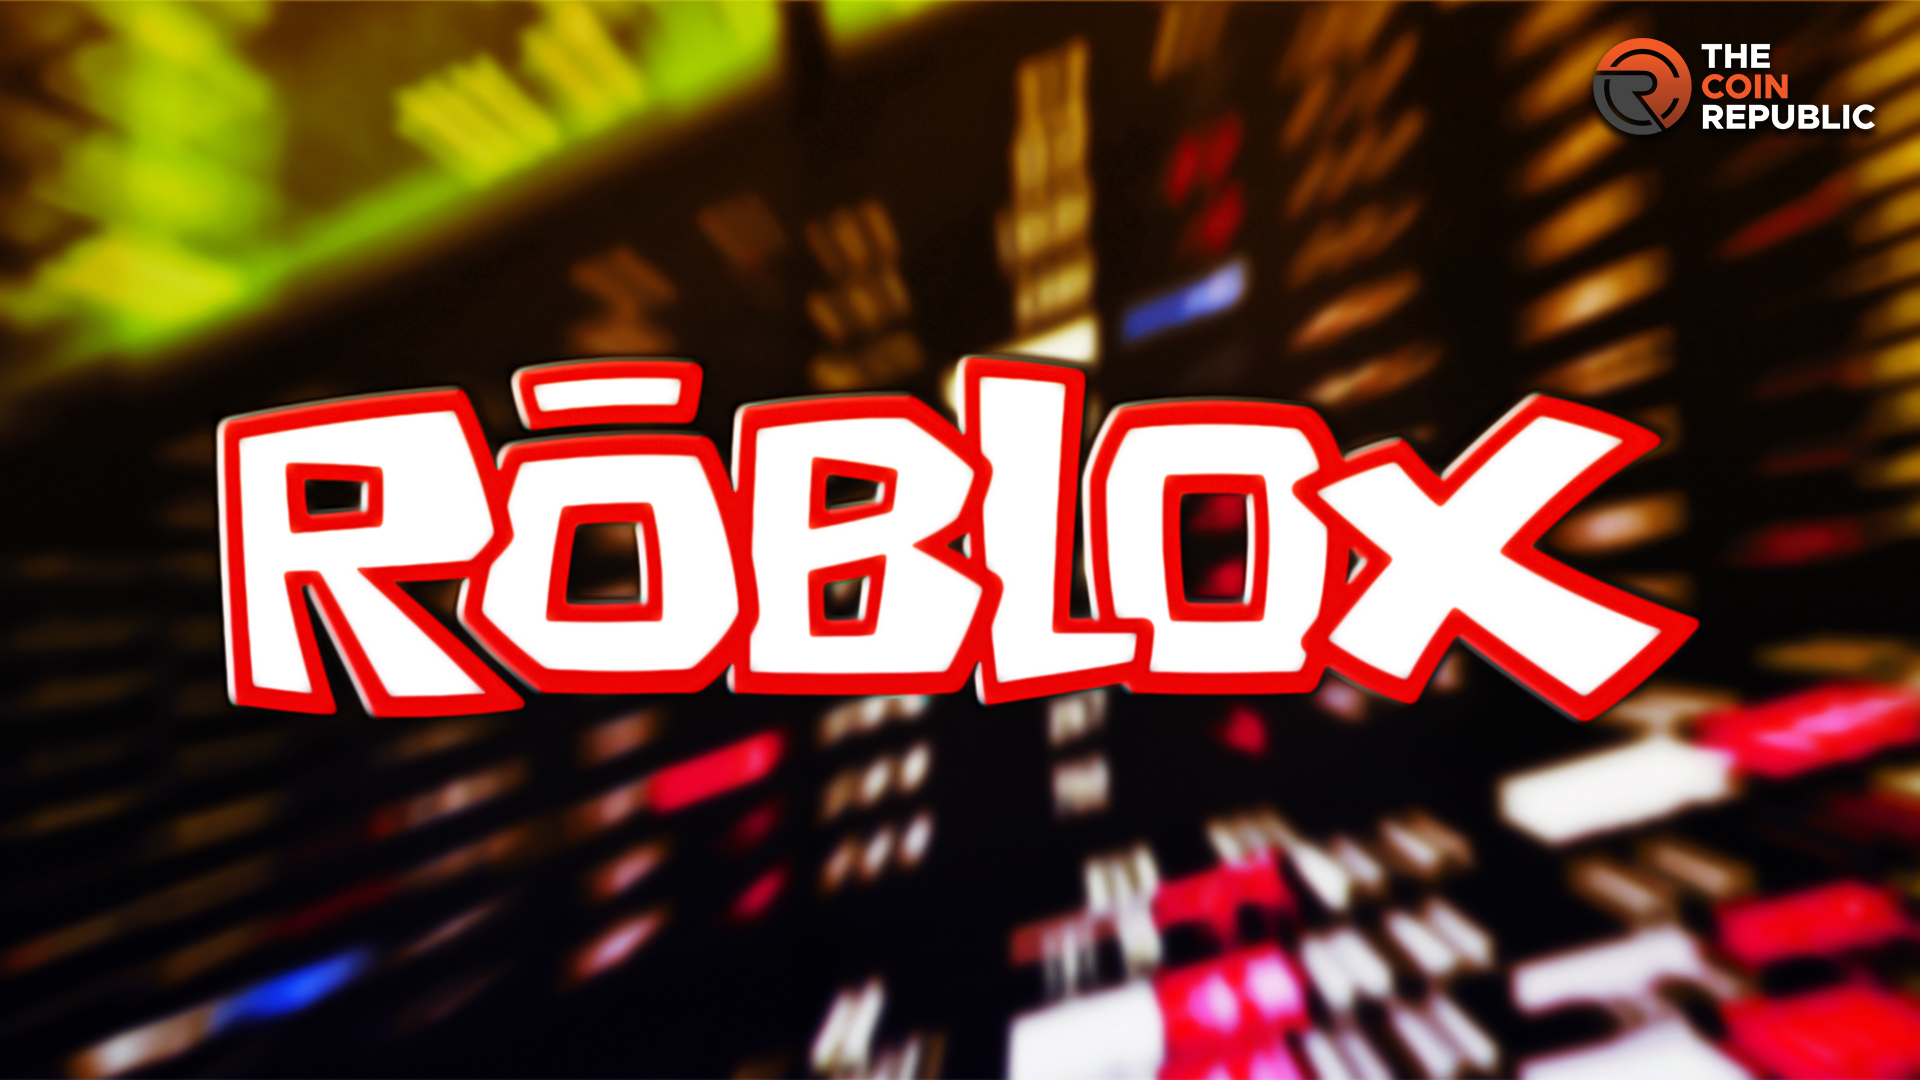 RBLX STOCK NEWS: Roblox Corporation Shareholders Should